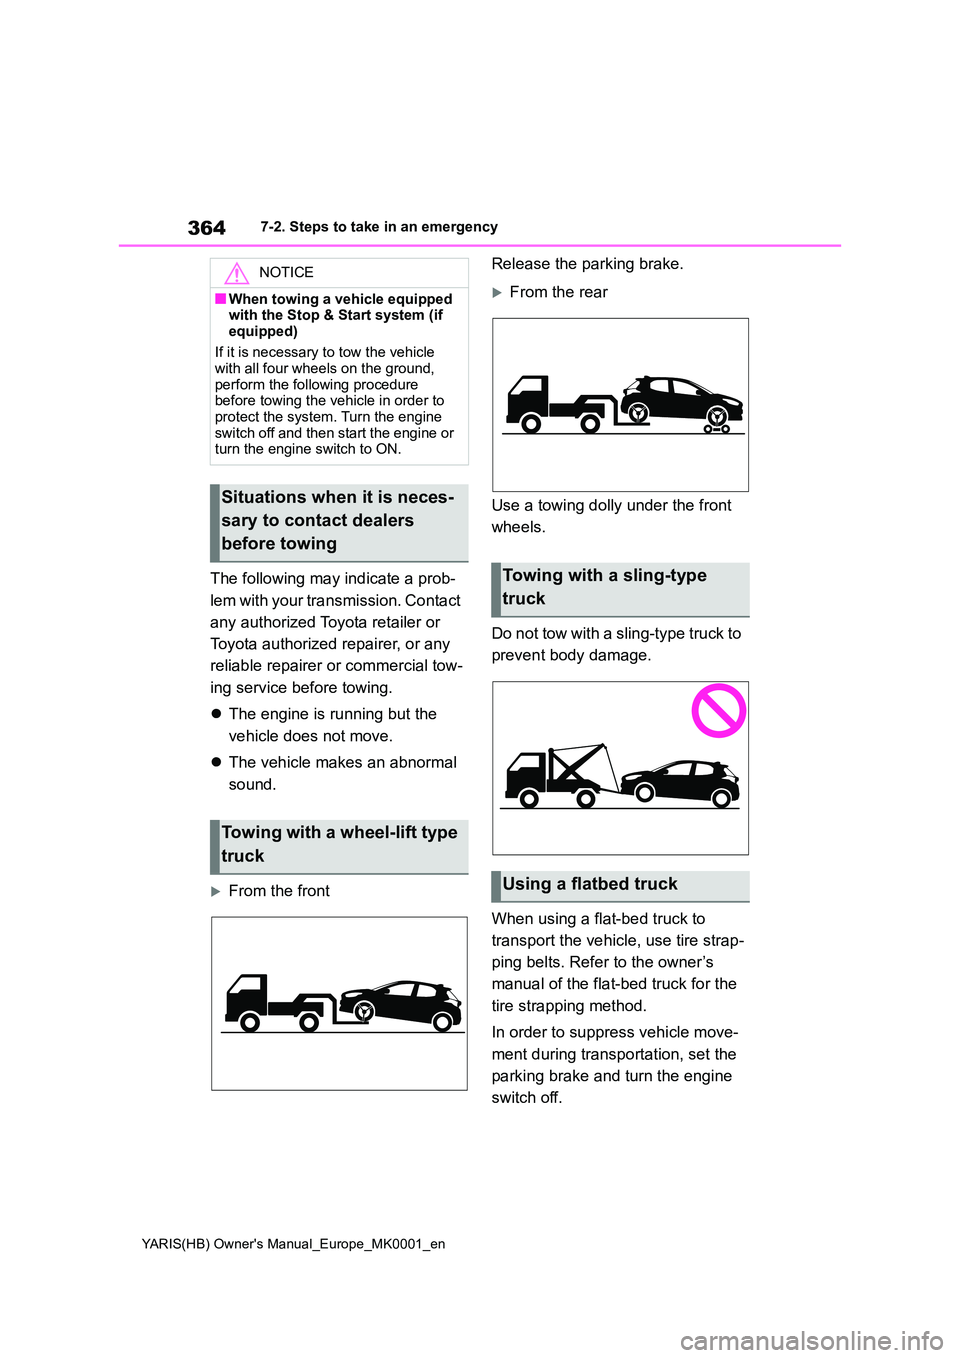 TOYOTA YARIS 2021 Service Manual 364
YARIS(HB) Owners Manual_Europe_MK0001_en
7-2. Steps to take in an emergency
The following may indicate a prob- 
lem with your transmission. Contact  
any authorized Toyota retailer or  
Toyota au